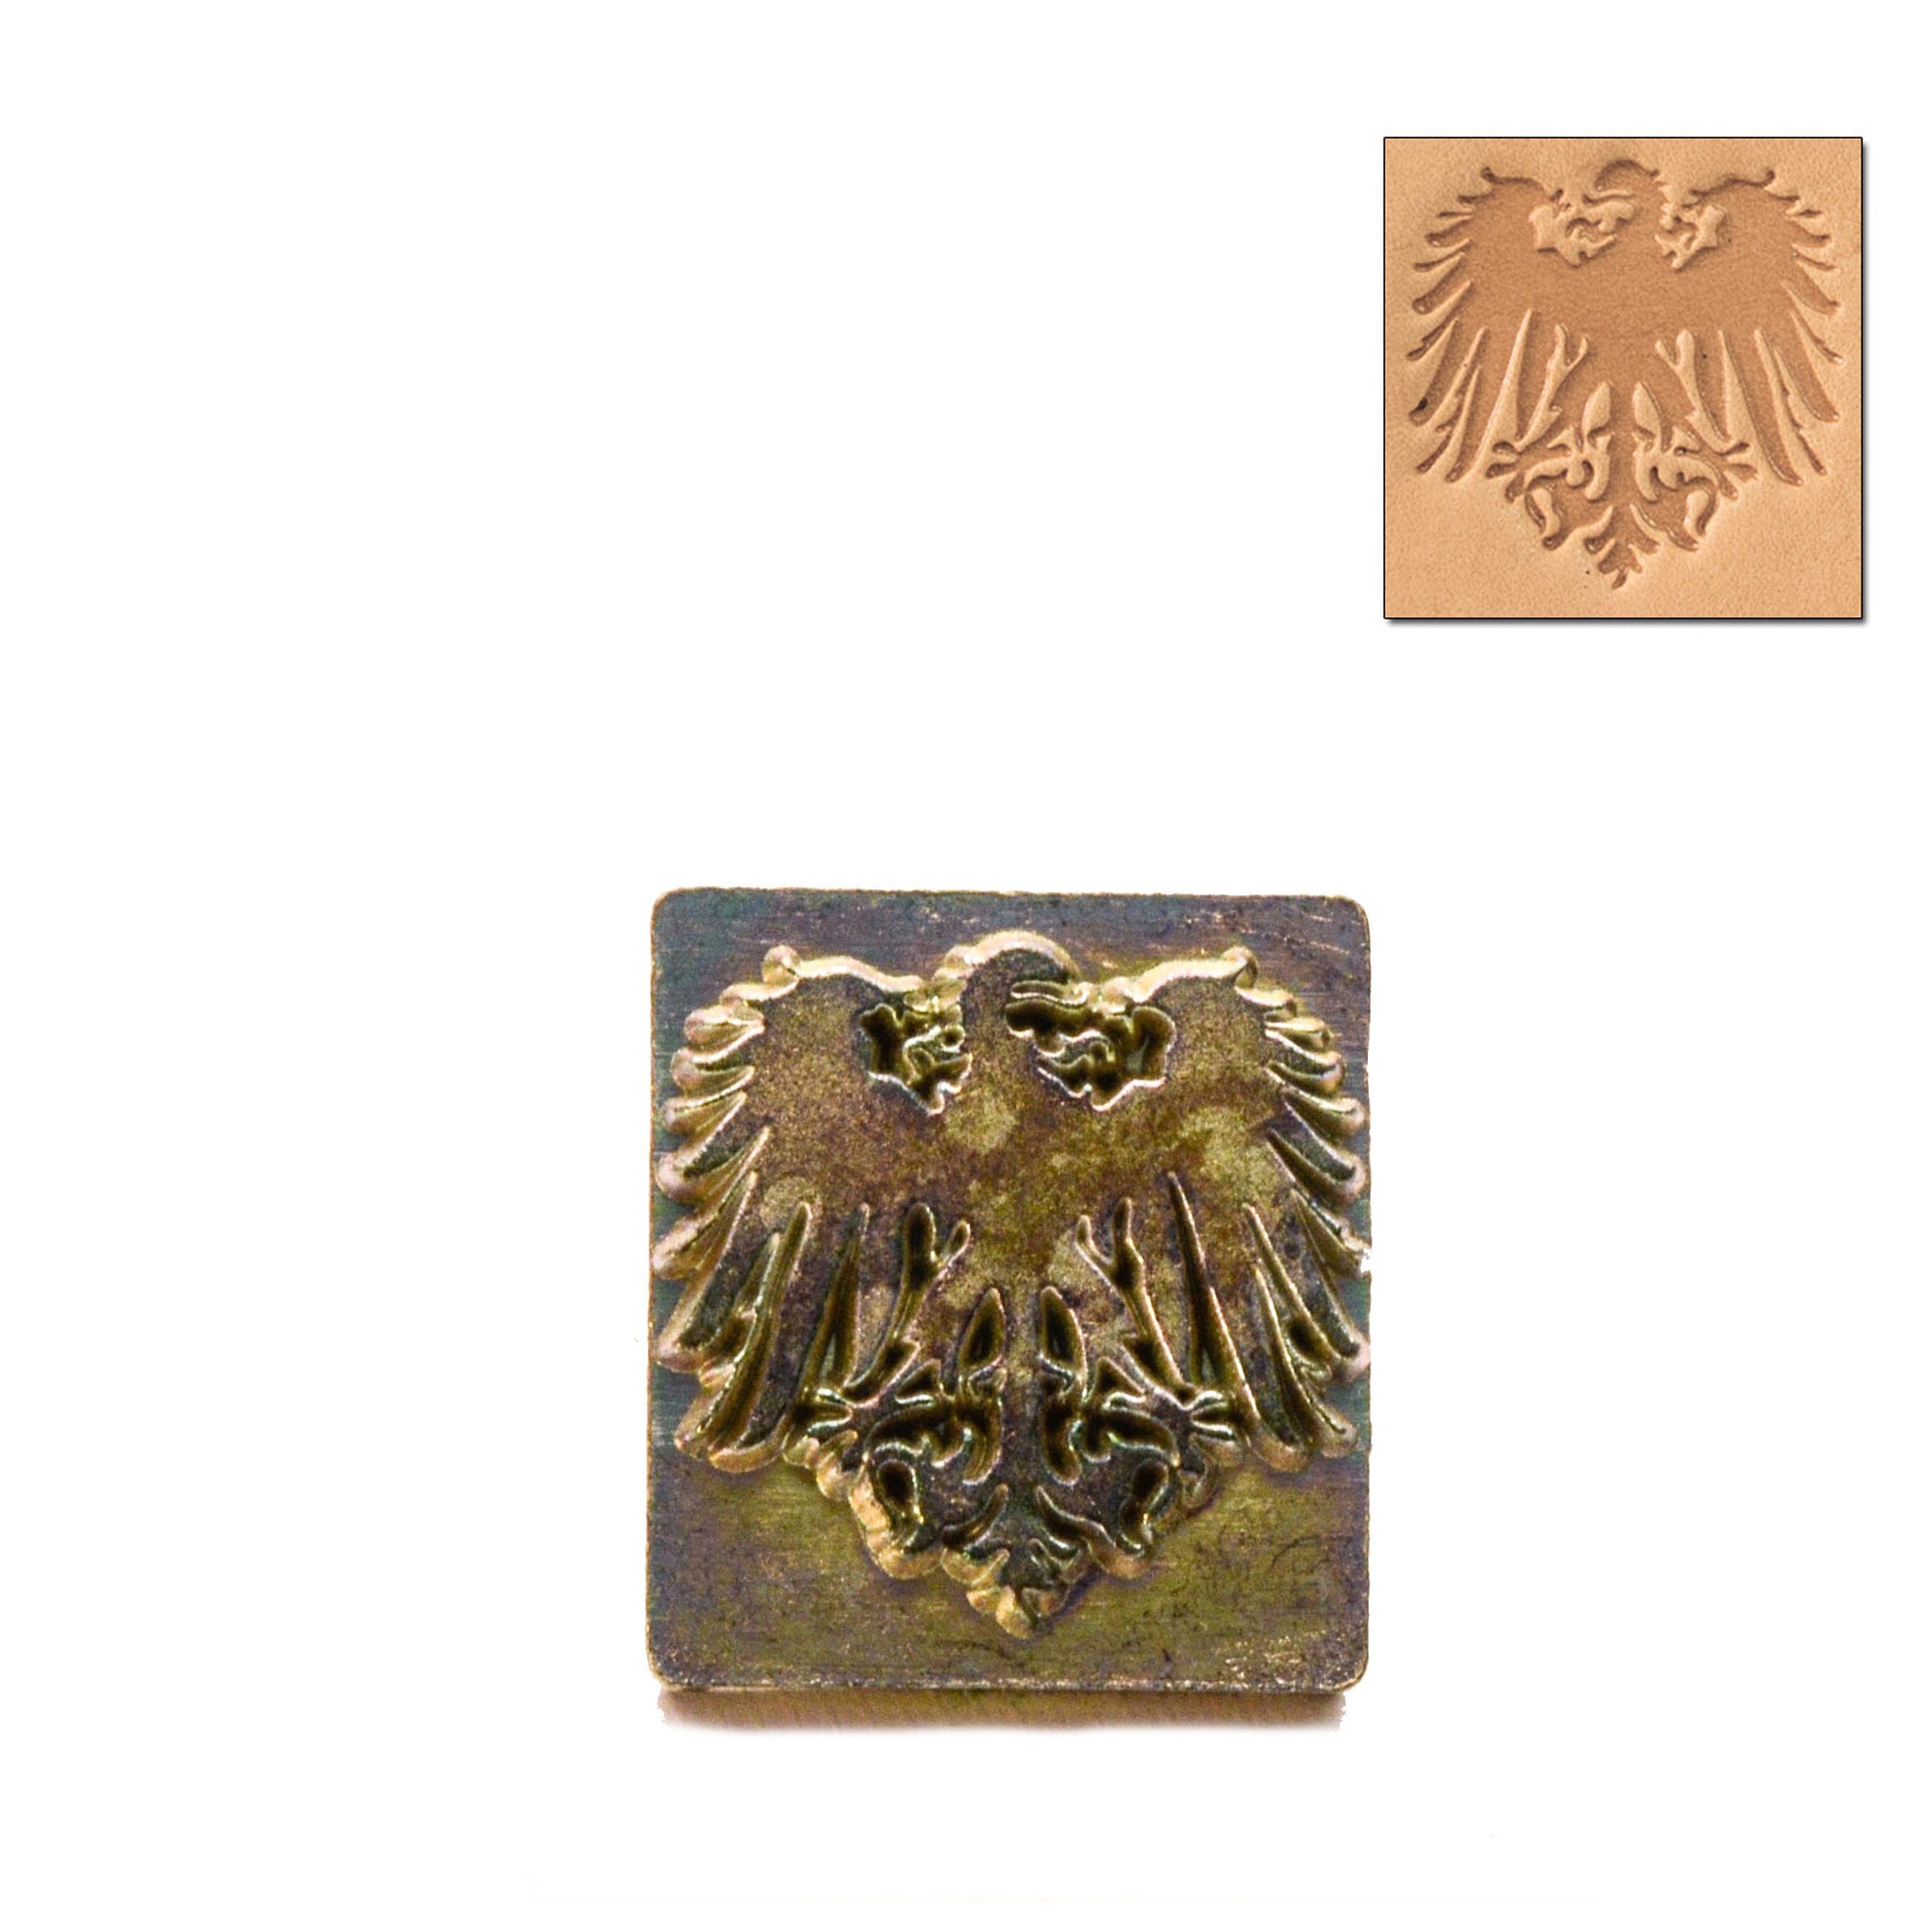 Heraldic Eagle 3D Embossing Stamp from Identity Leathercraft